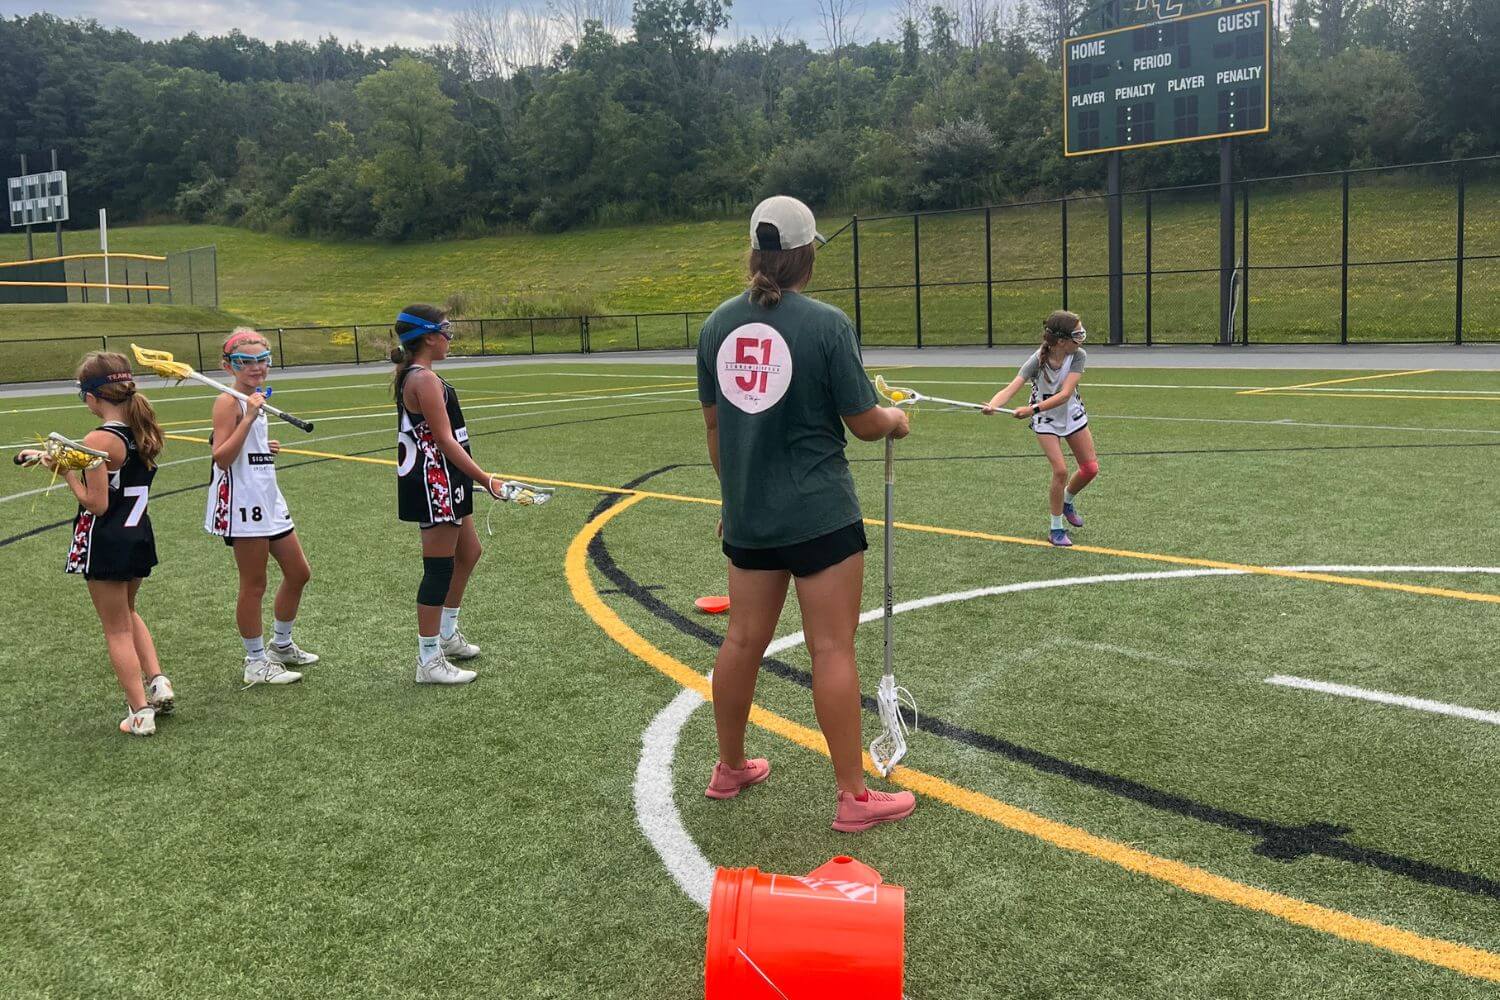 Female professional lacrosse player coaching young girls at practice during summer camp